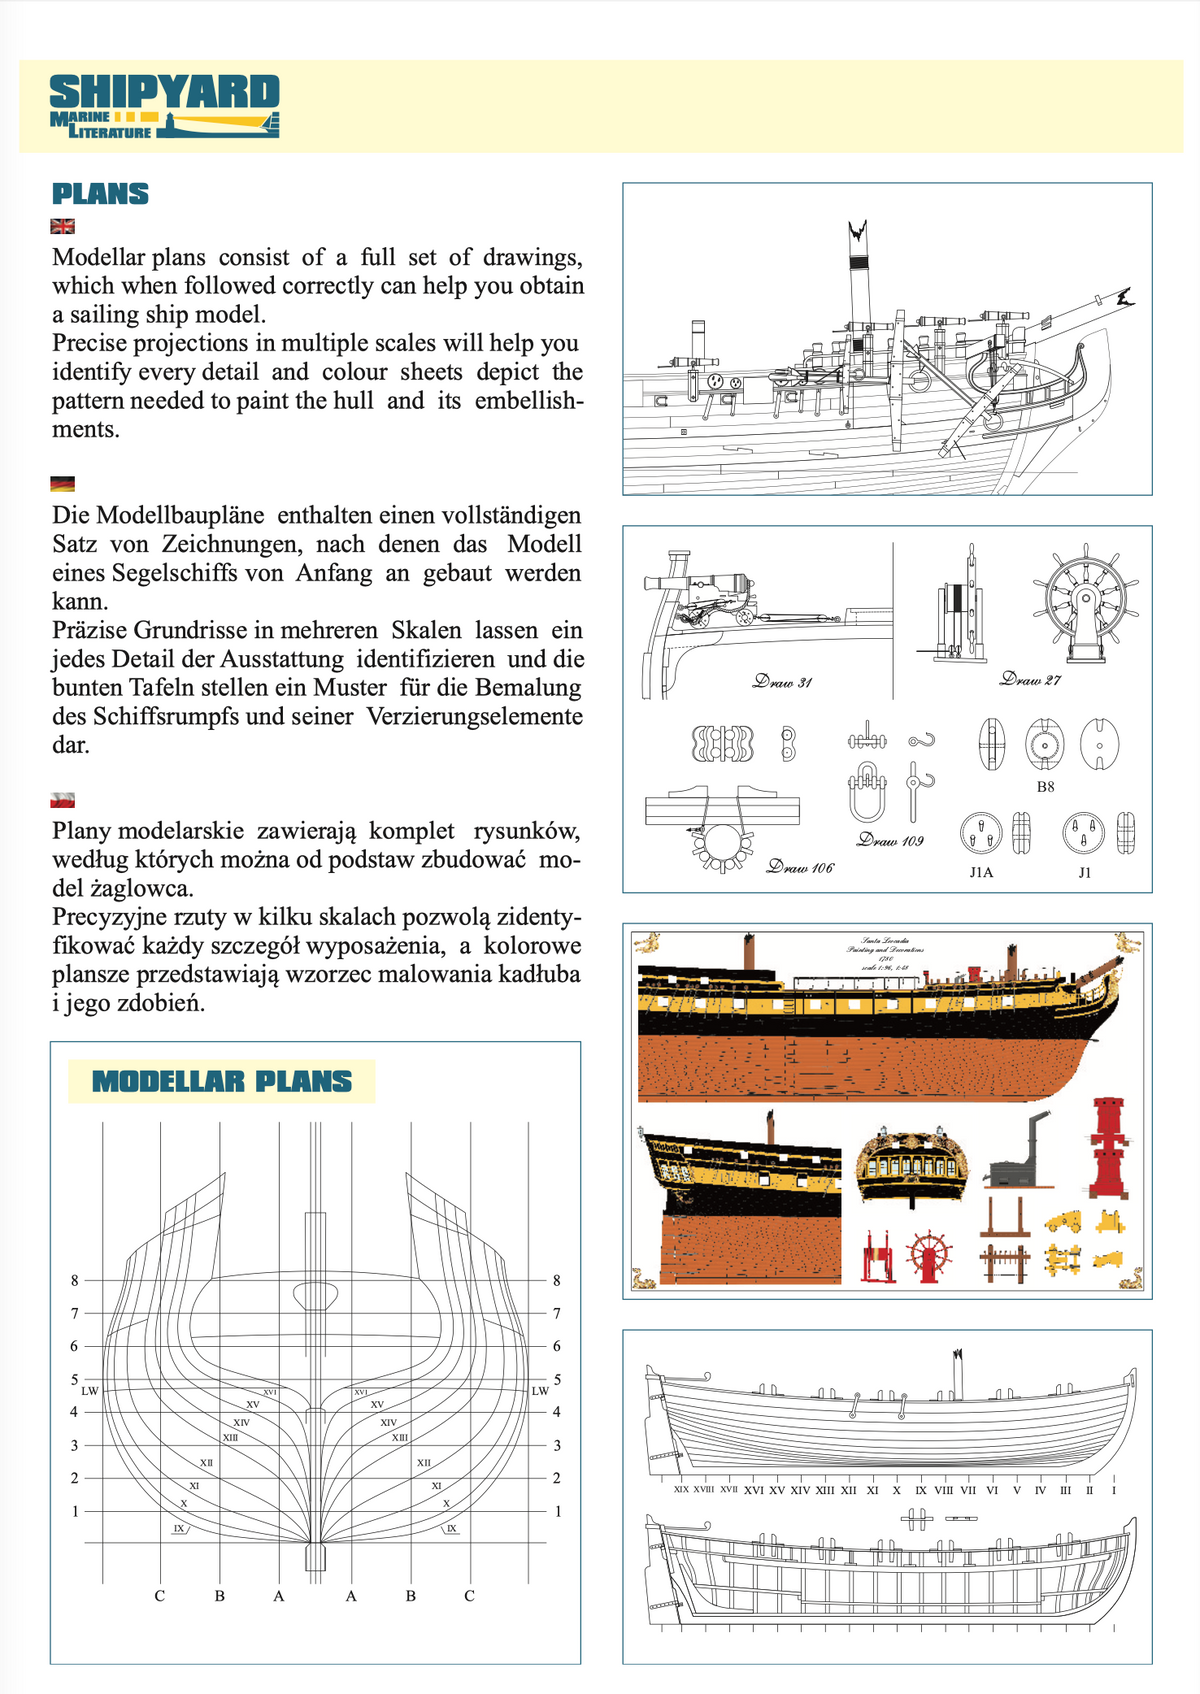 Photo of HMS Success Construction Plans from Shipyard, showcasing detailed blueprints and guidelines for creating an authentic replica of the historic ship.